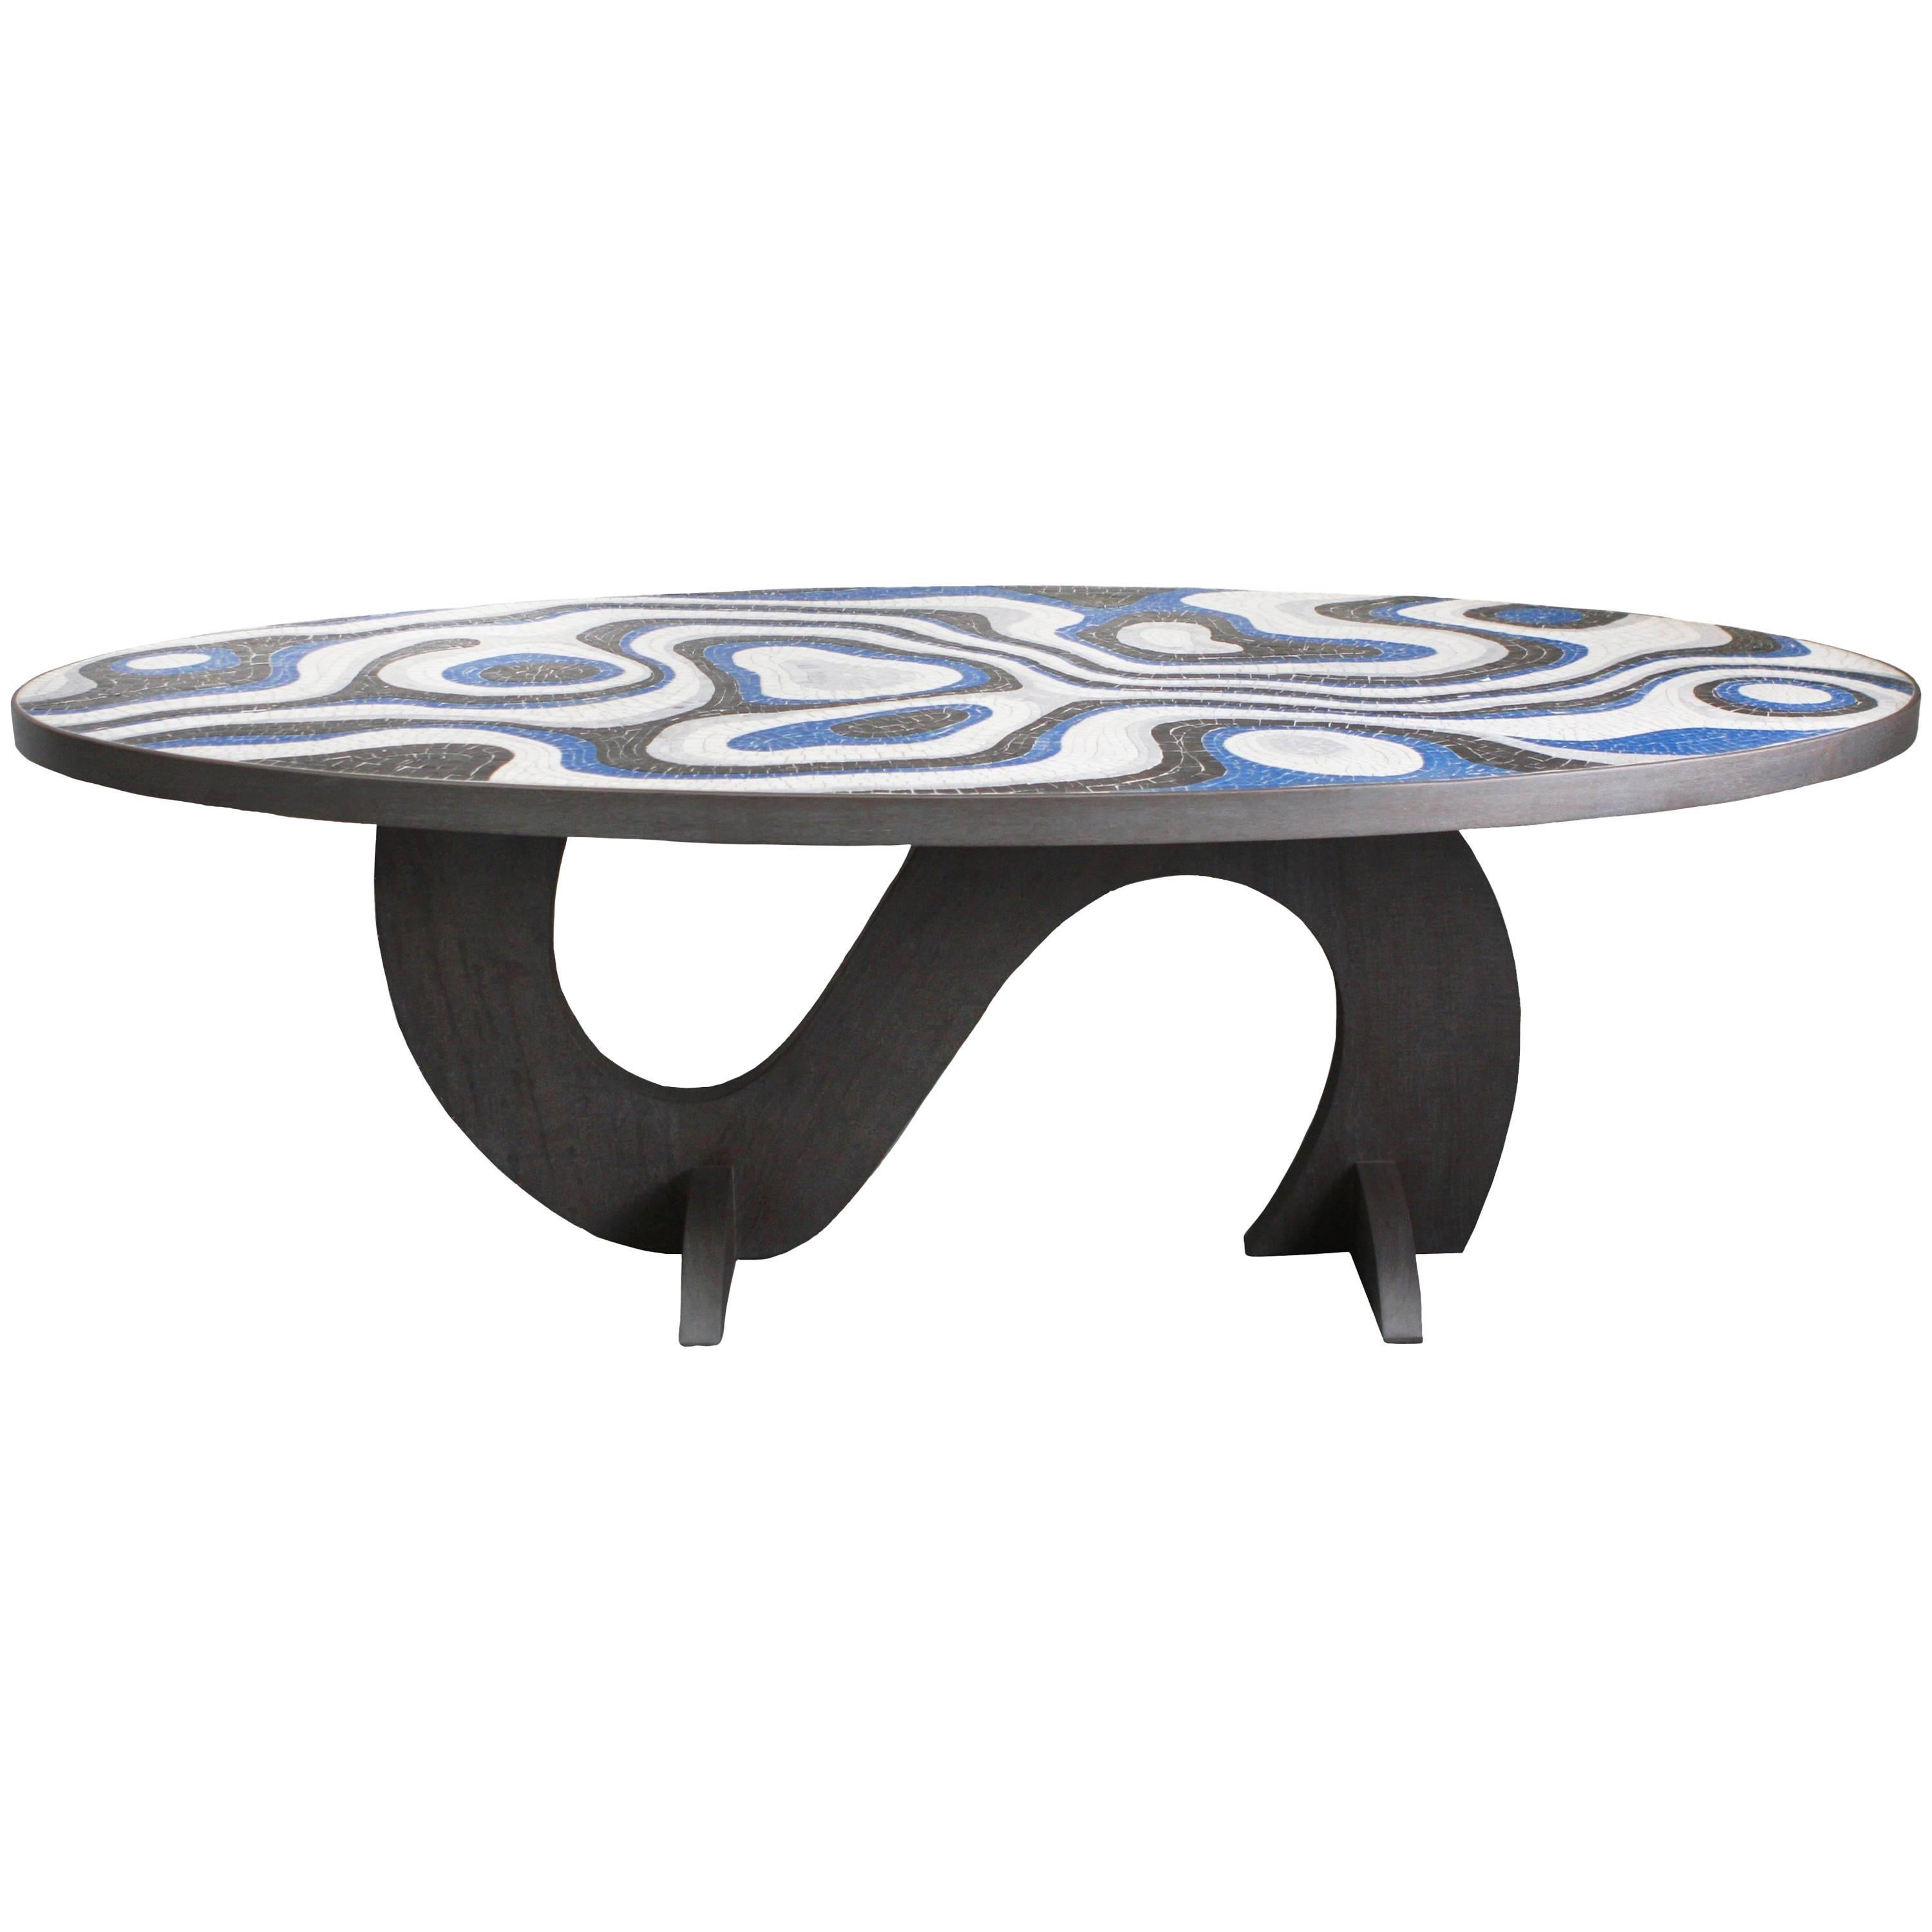 Custom Kelly Behun Studio outdoor dining table with stone mosaic top and teak base.
Mosaic shown is comprised of hand cut Nero Marquina, Carrara, Cristalino and blue quartz.
Custom sizes and mosaic patterns/colors as well as a variety of table base